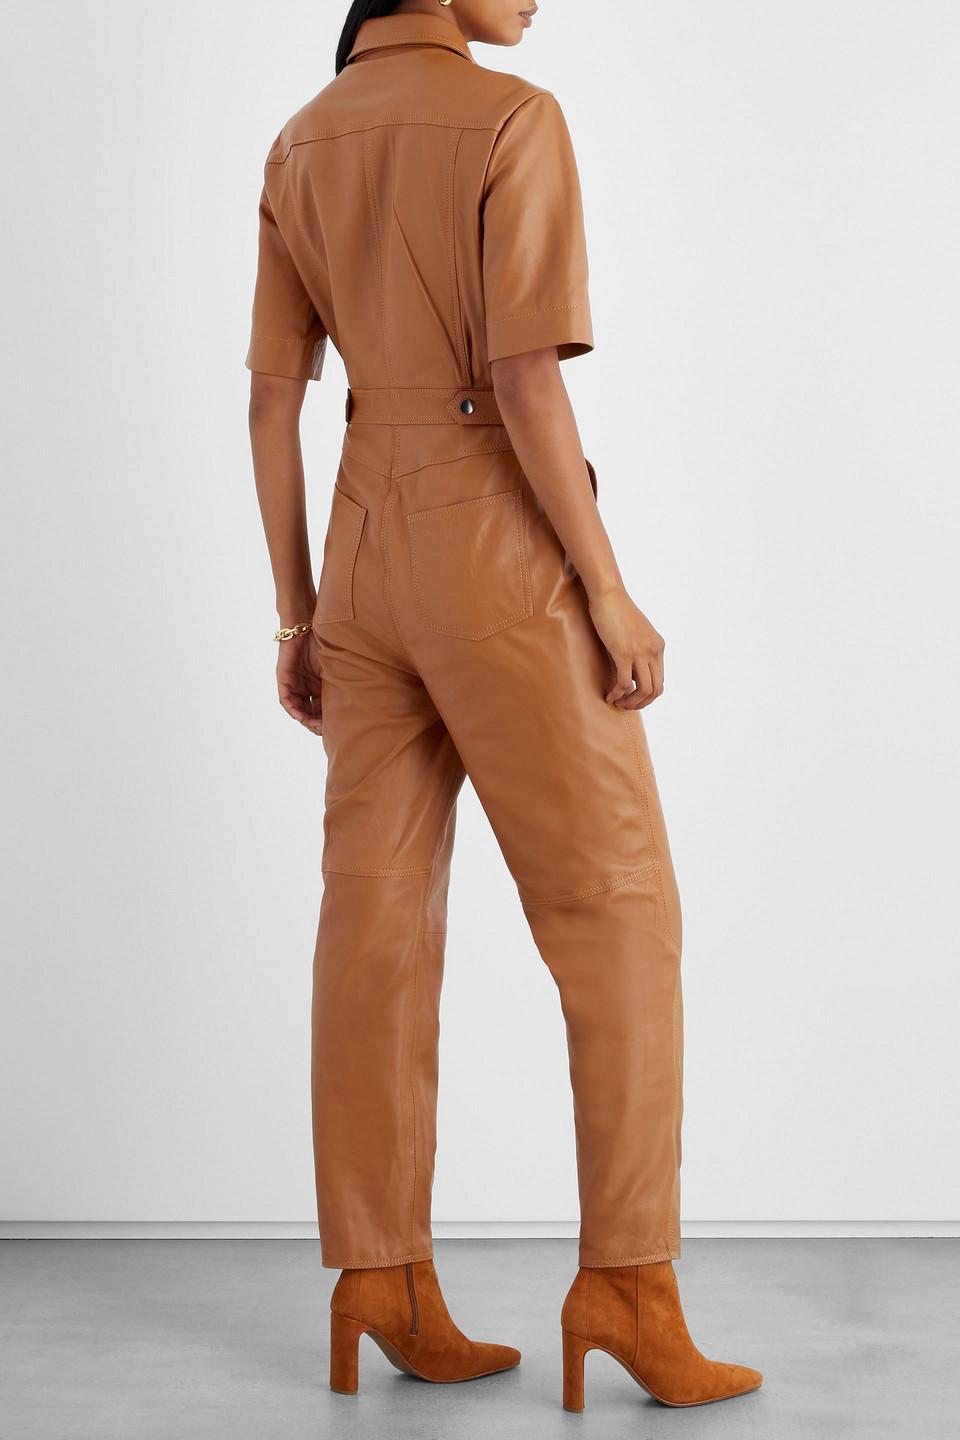 Iris & Ink Blisse Leather Jumpsuit in Tan (Brown) - Lyst